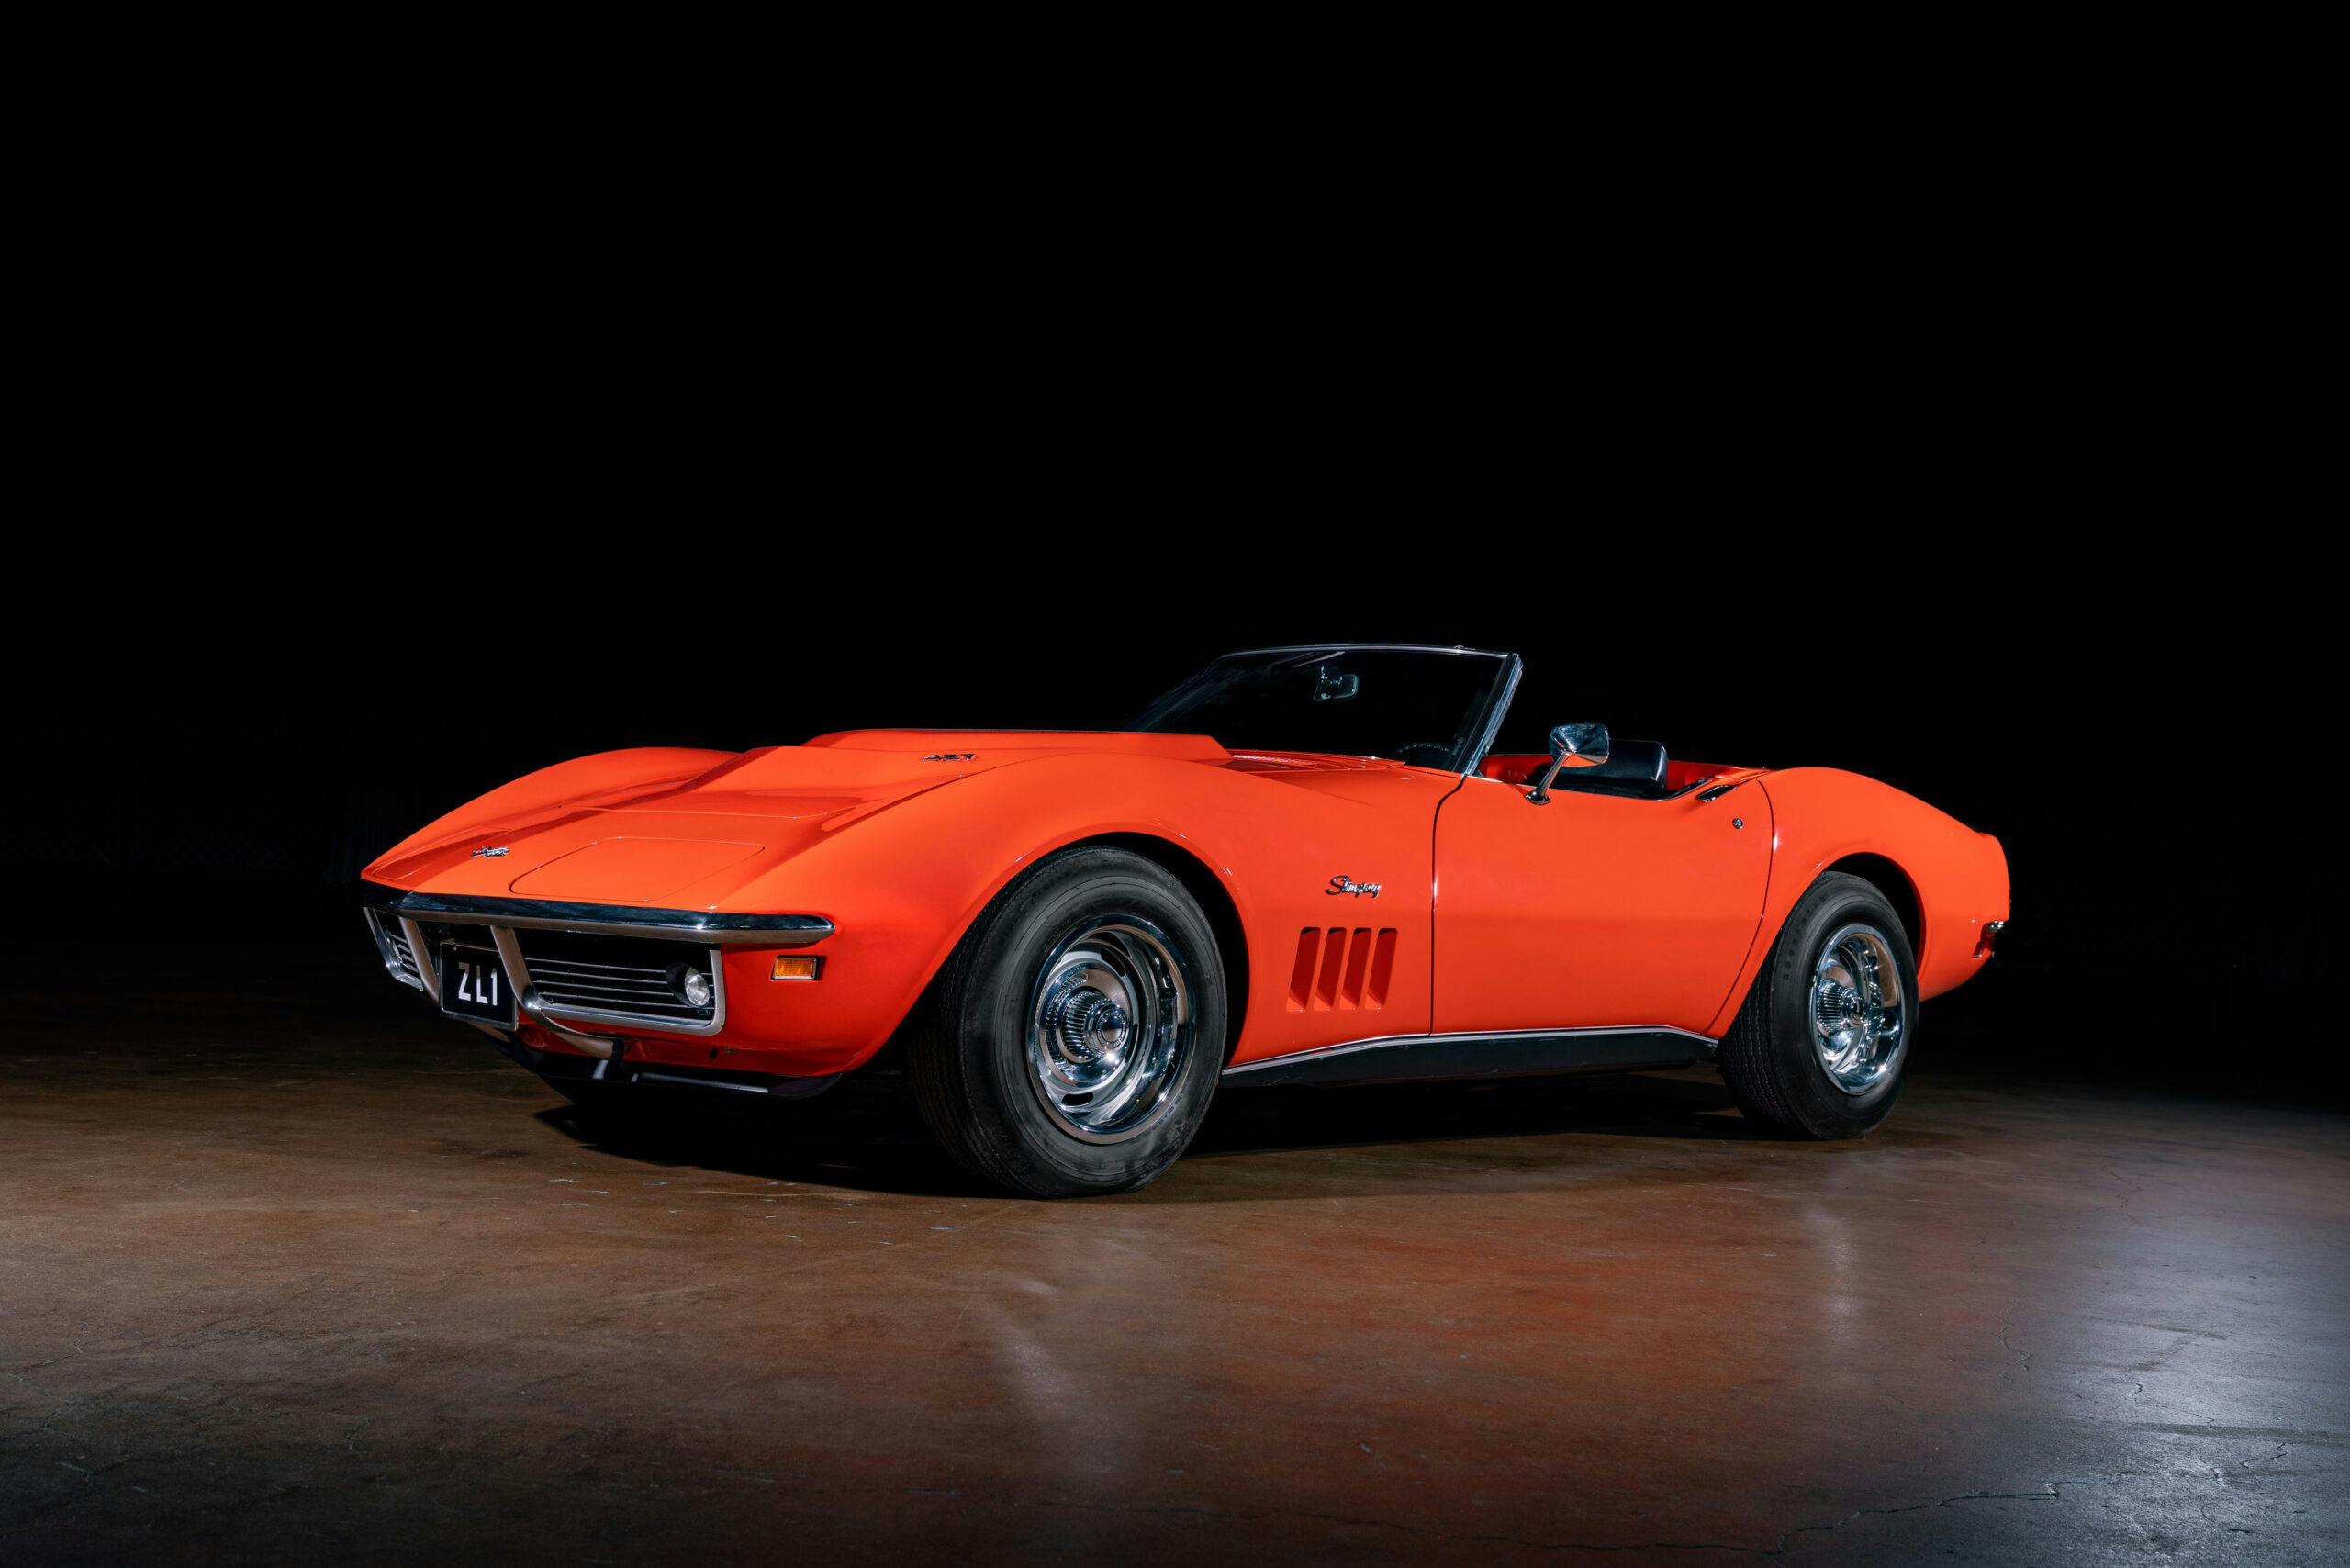 One Of Two 1969 Zl1 Is Holy Grail Of Corvettes Could Sell For 3m